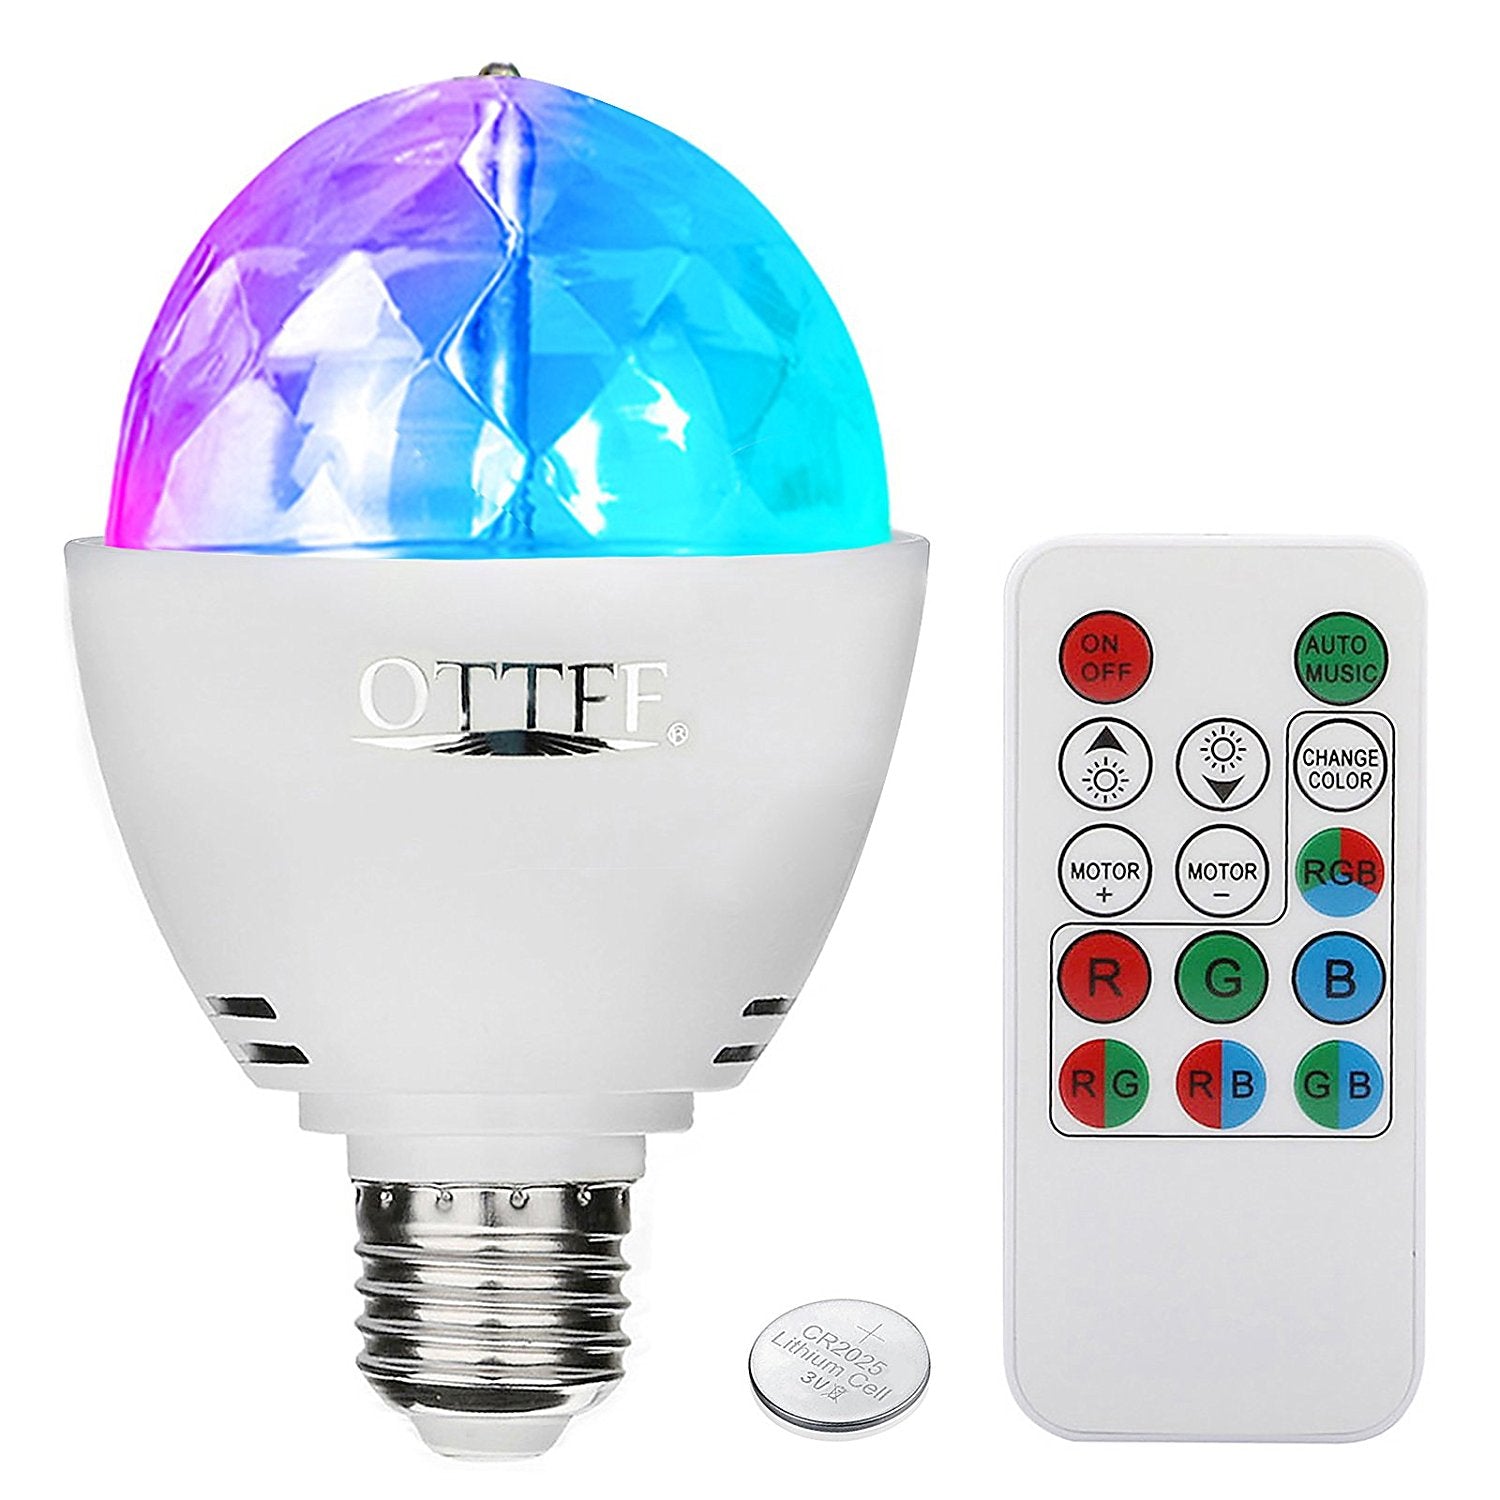 OTTFF 3W E27 Disco Ball Lamp RGB Rotating LED Sound Activated Party Light Bulb with Remote Control